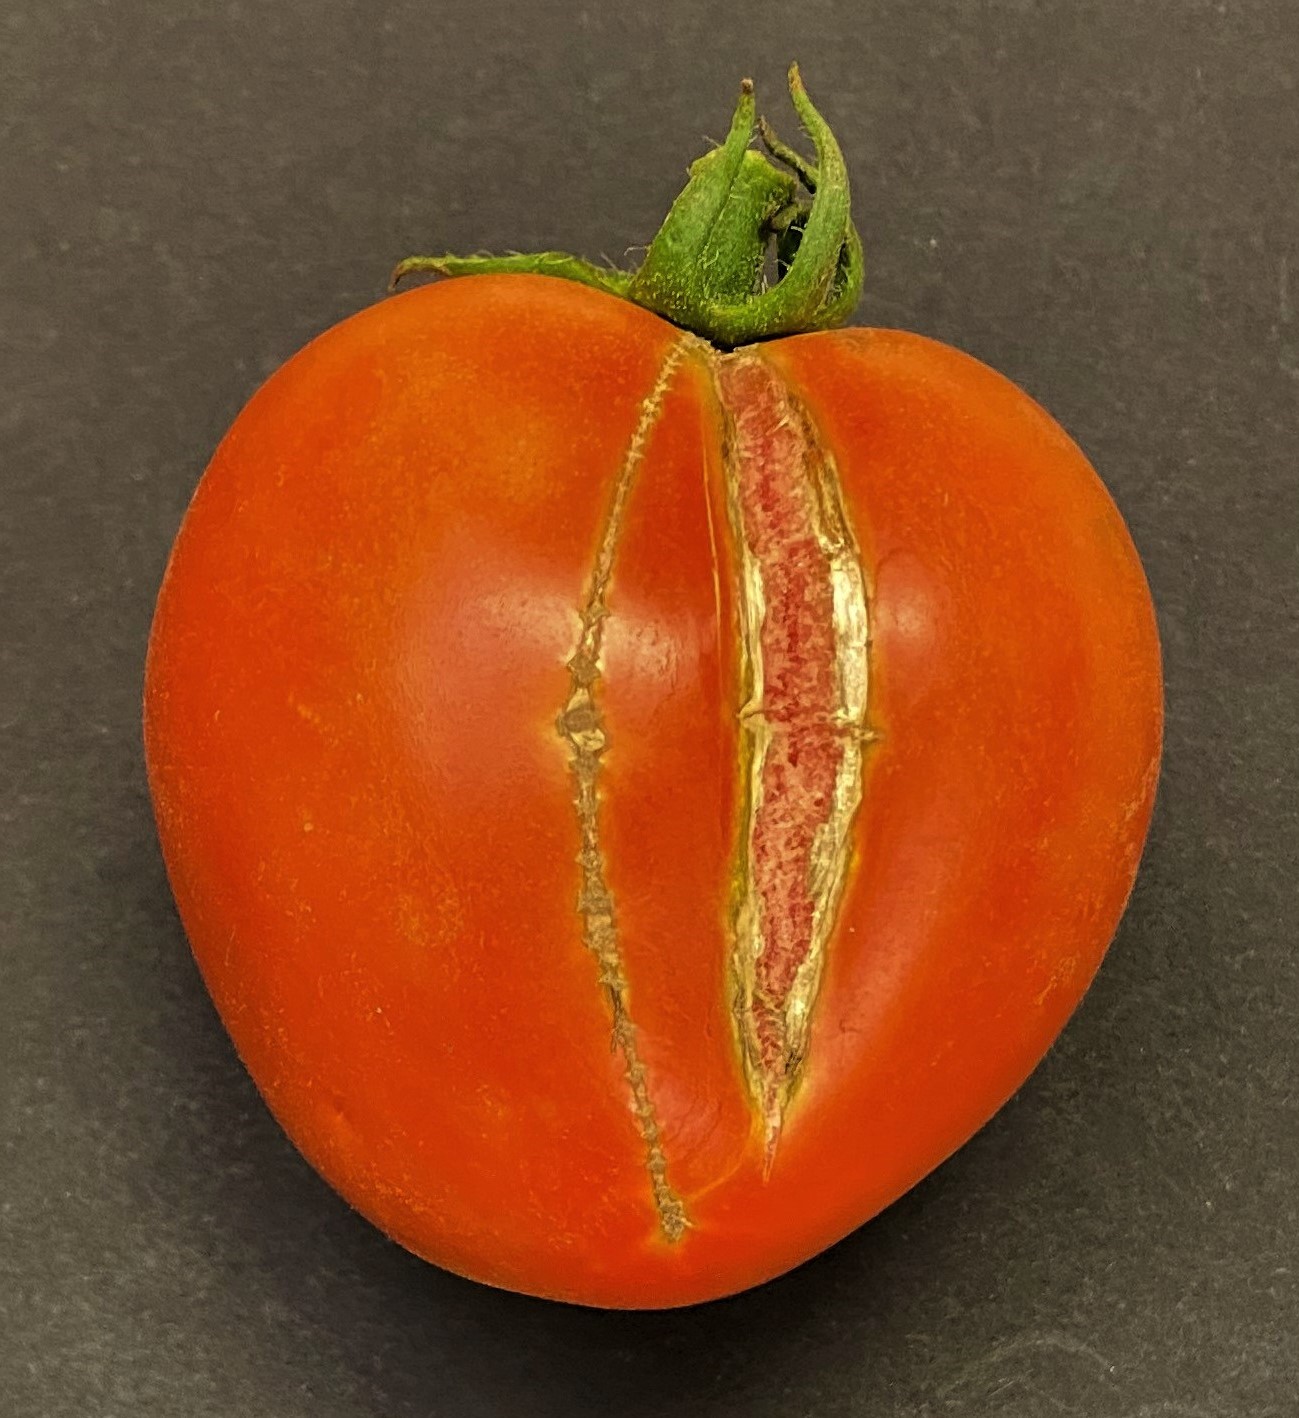 A vertical split in a Mountain Merit tomato appeared following heavy rainfall after a droughty period.